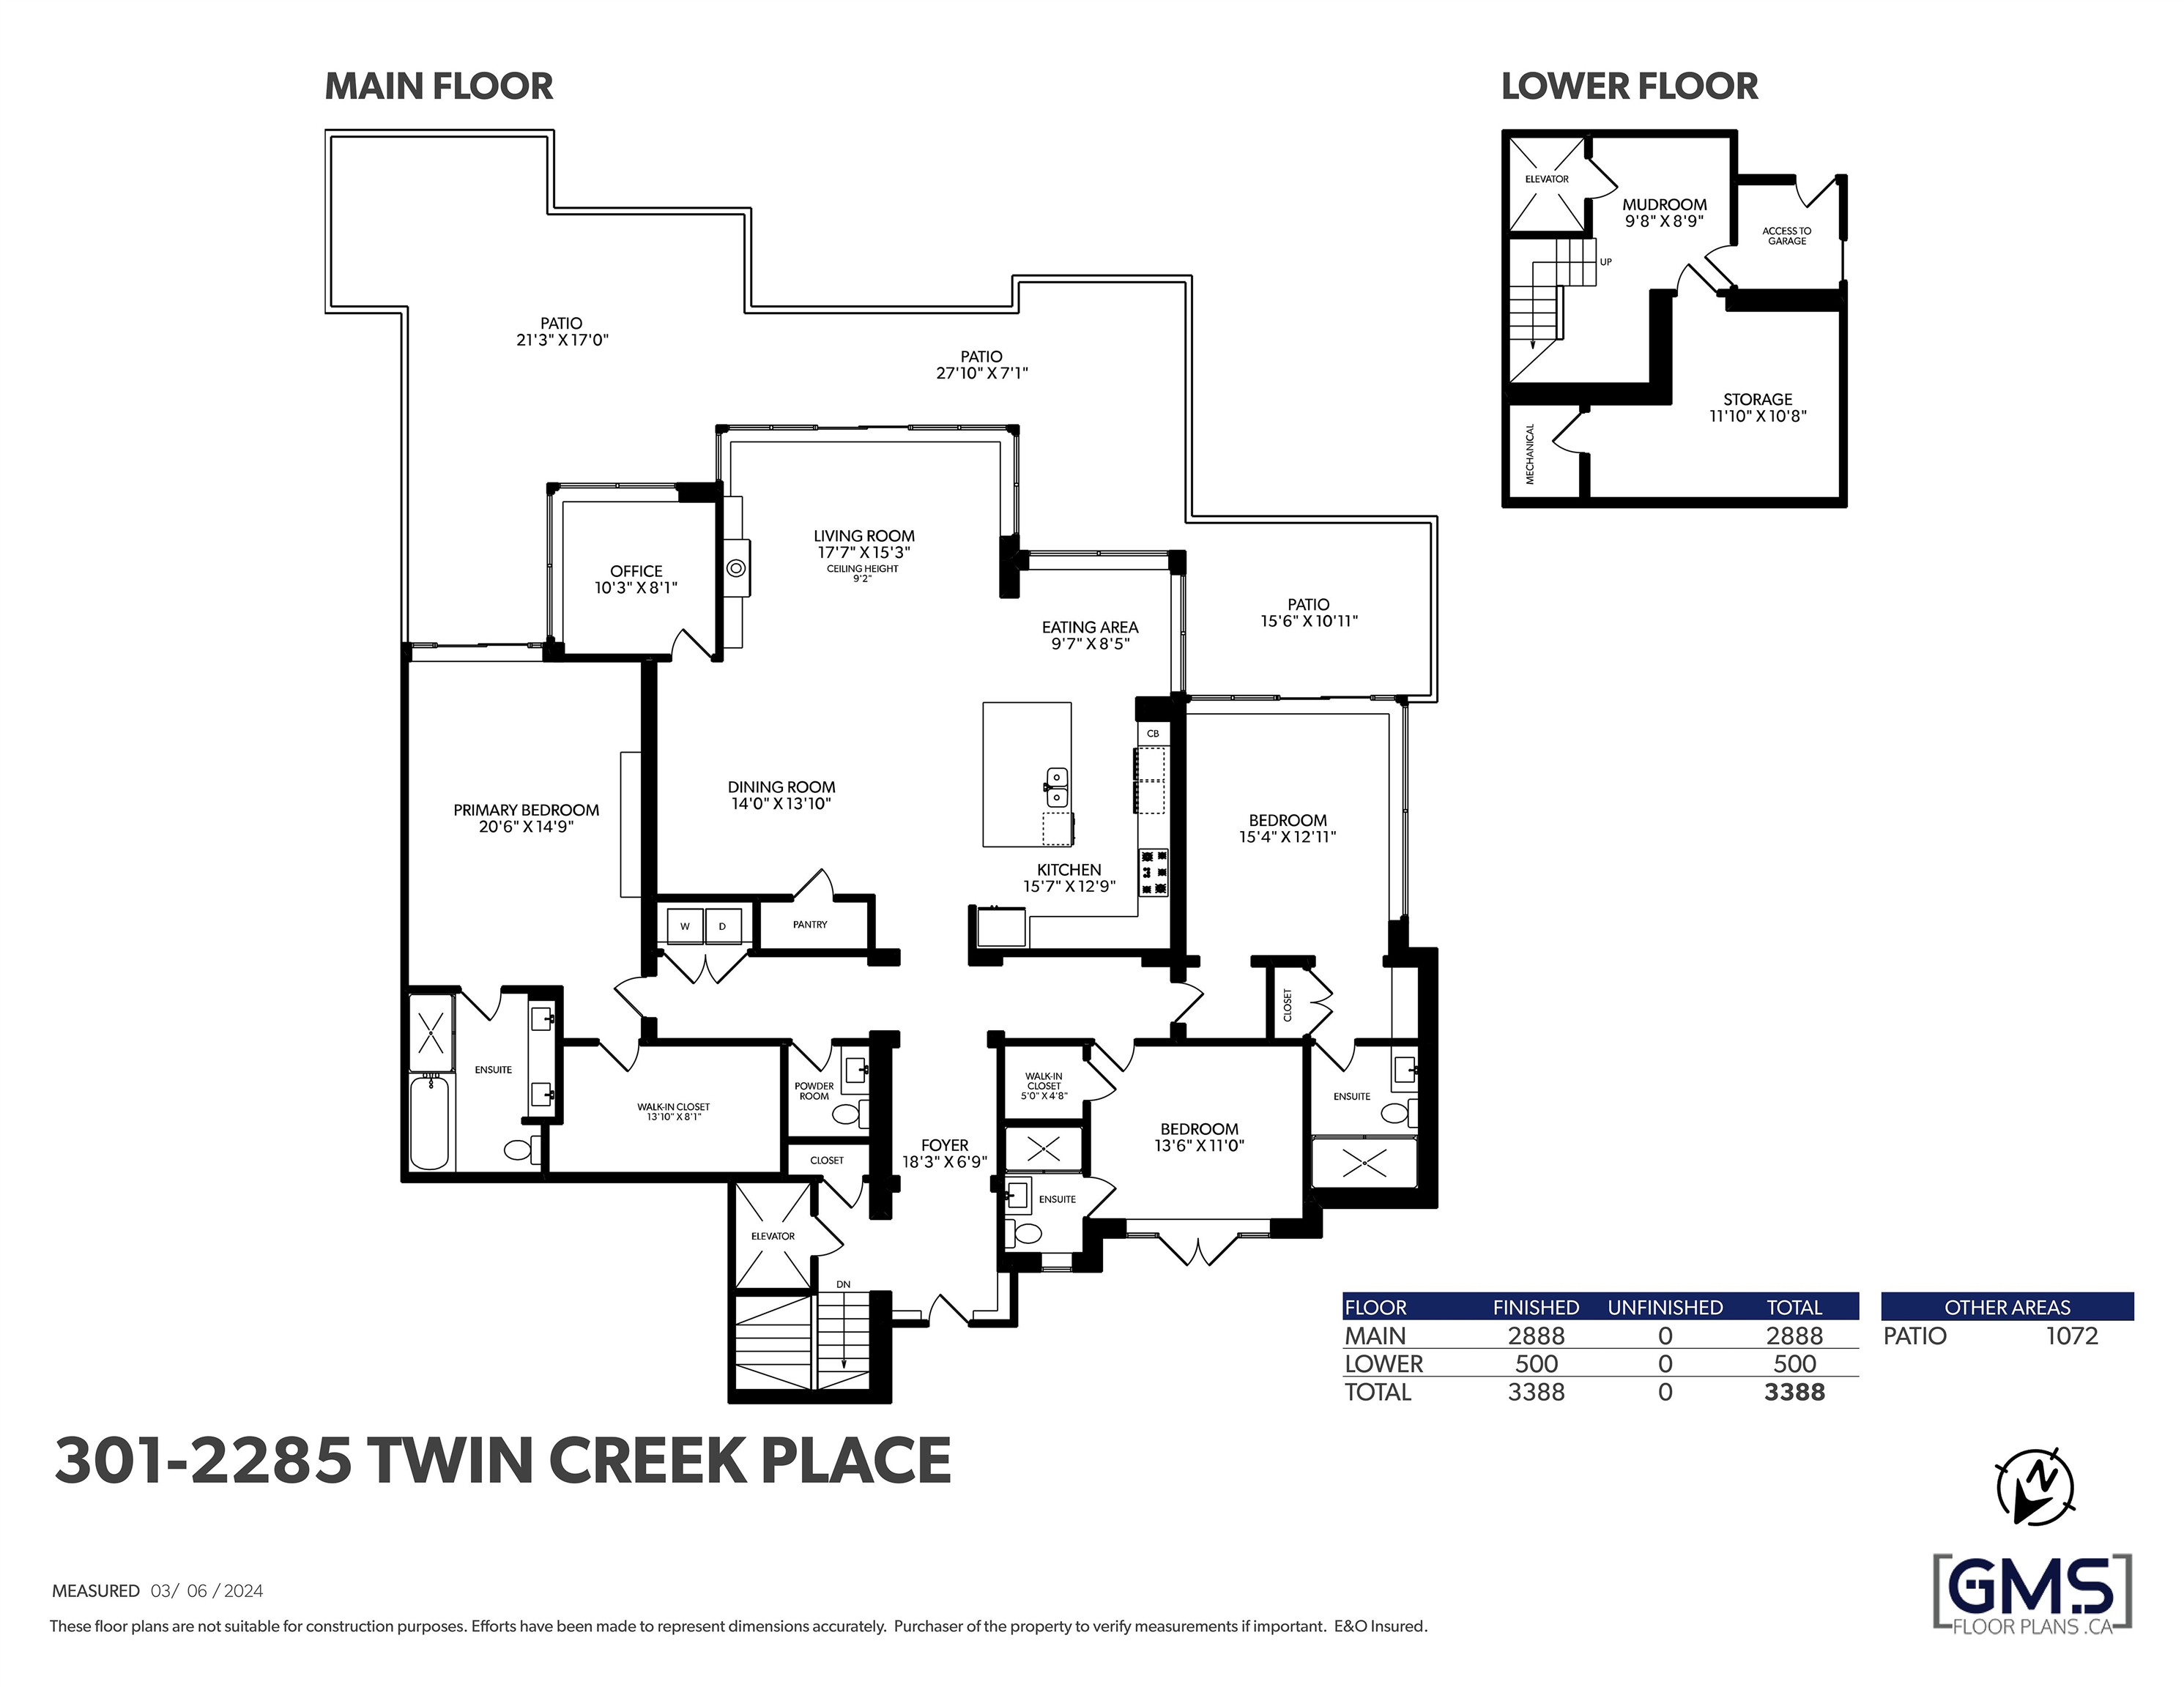 Listing image of 301 2285 TWIN CREEK PLACE